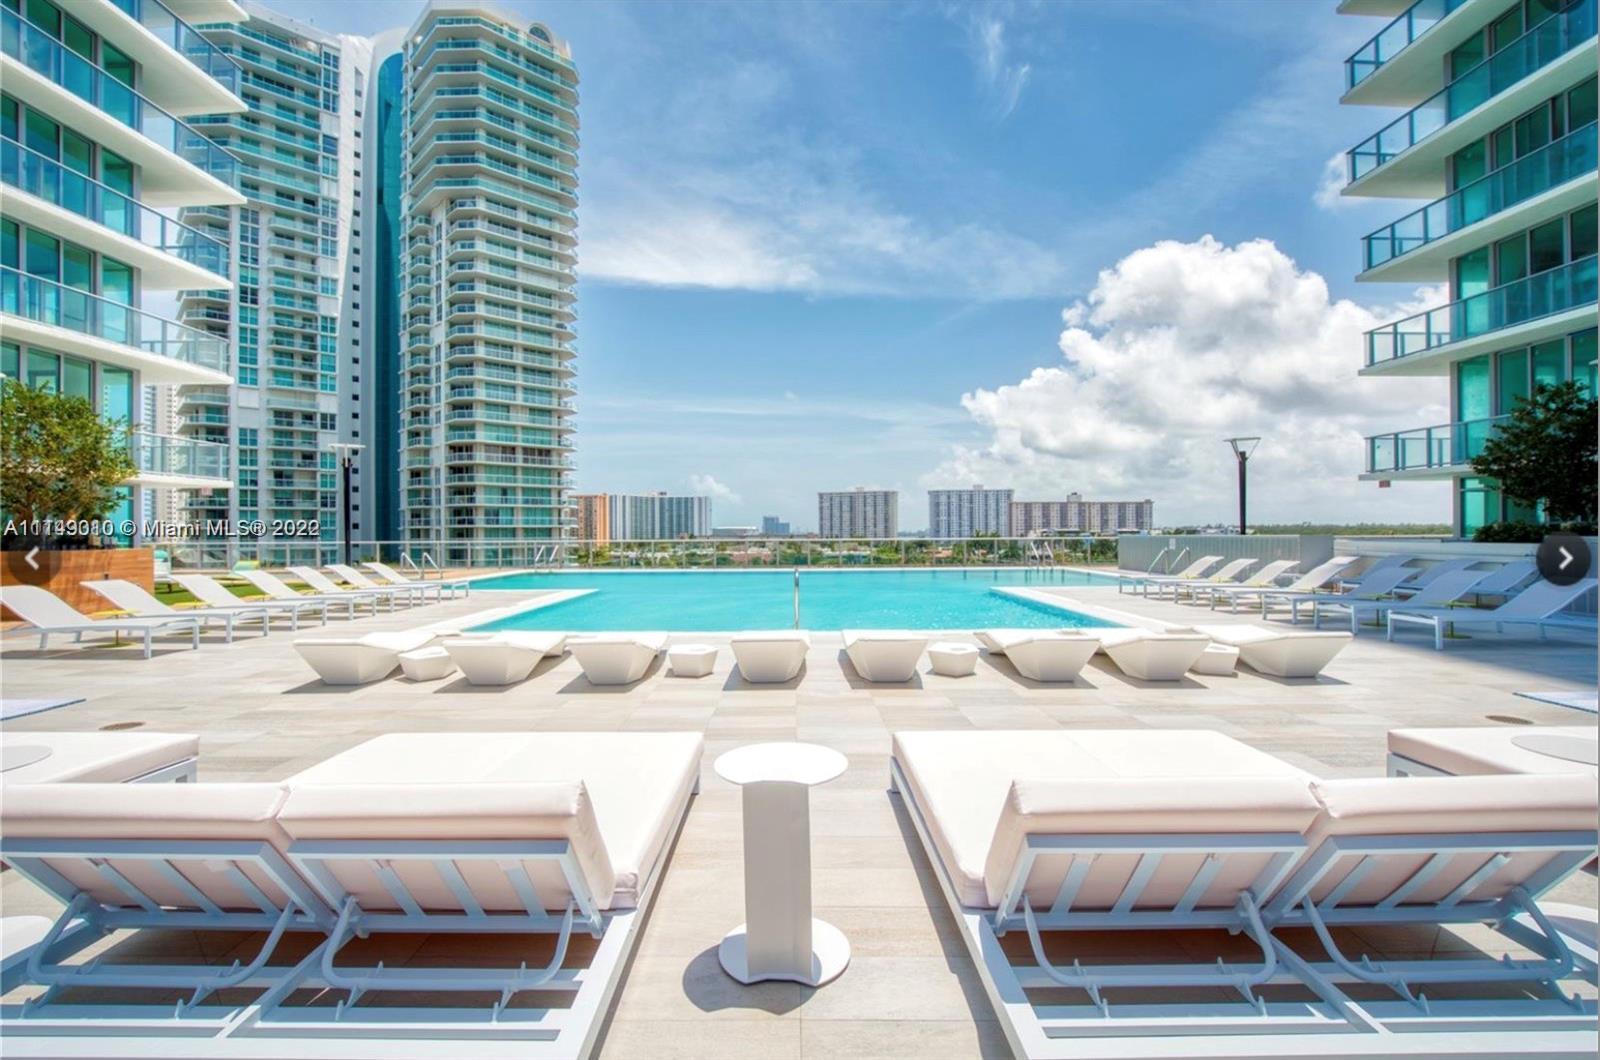 Completely furnished, awesome views from this high floor to the city, ocean, and Intracoastal. Porce